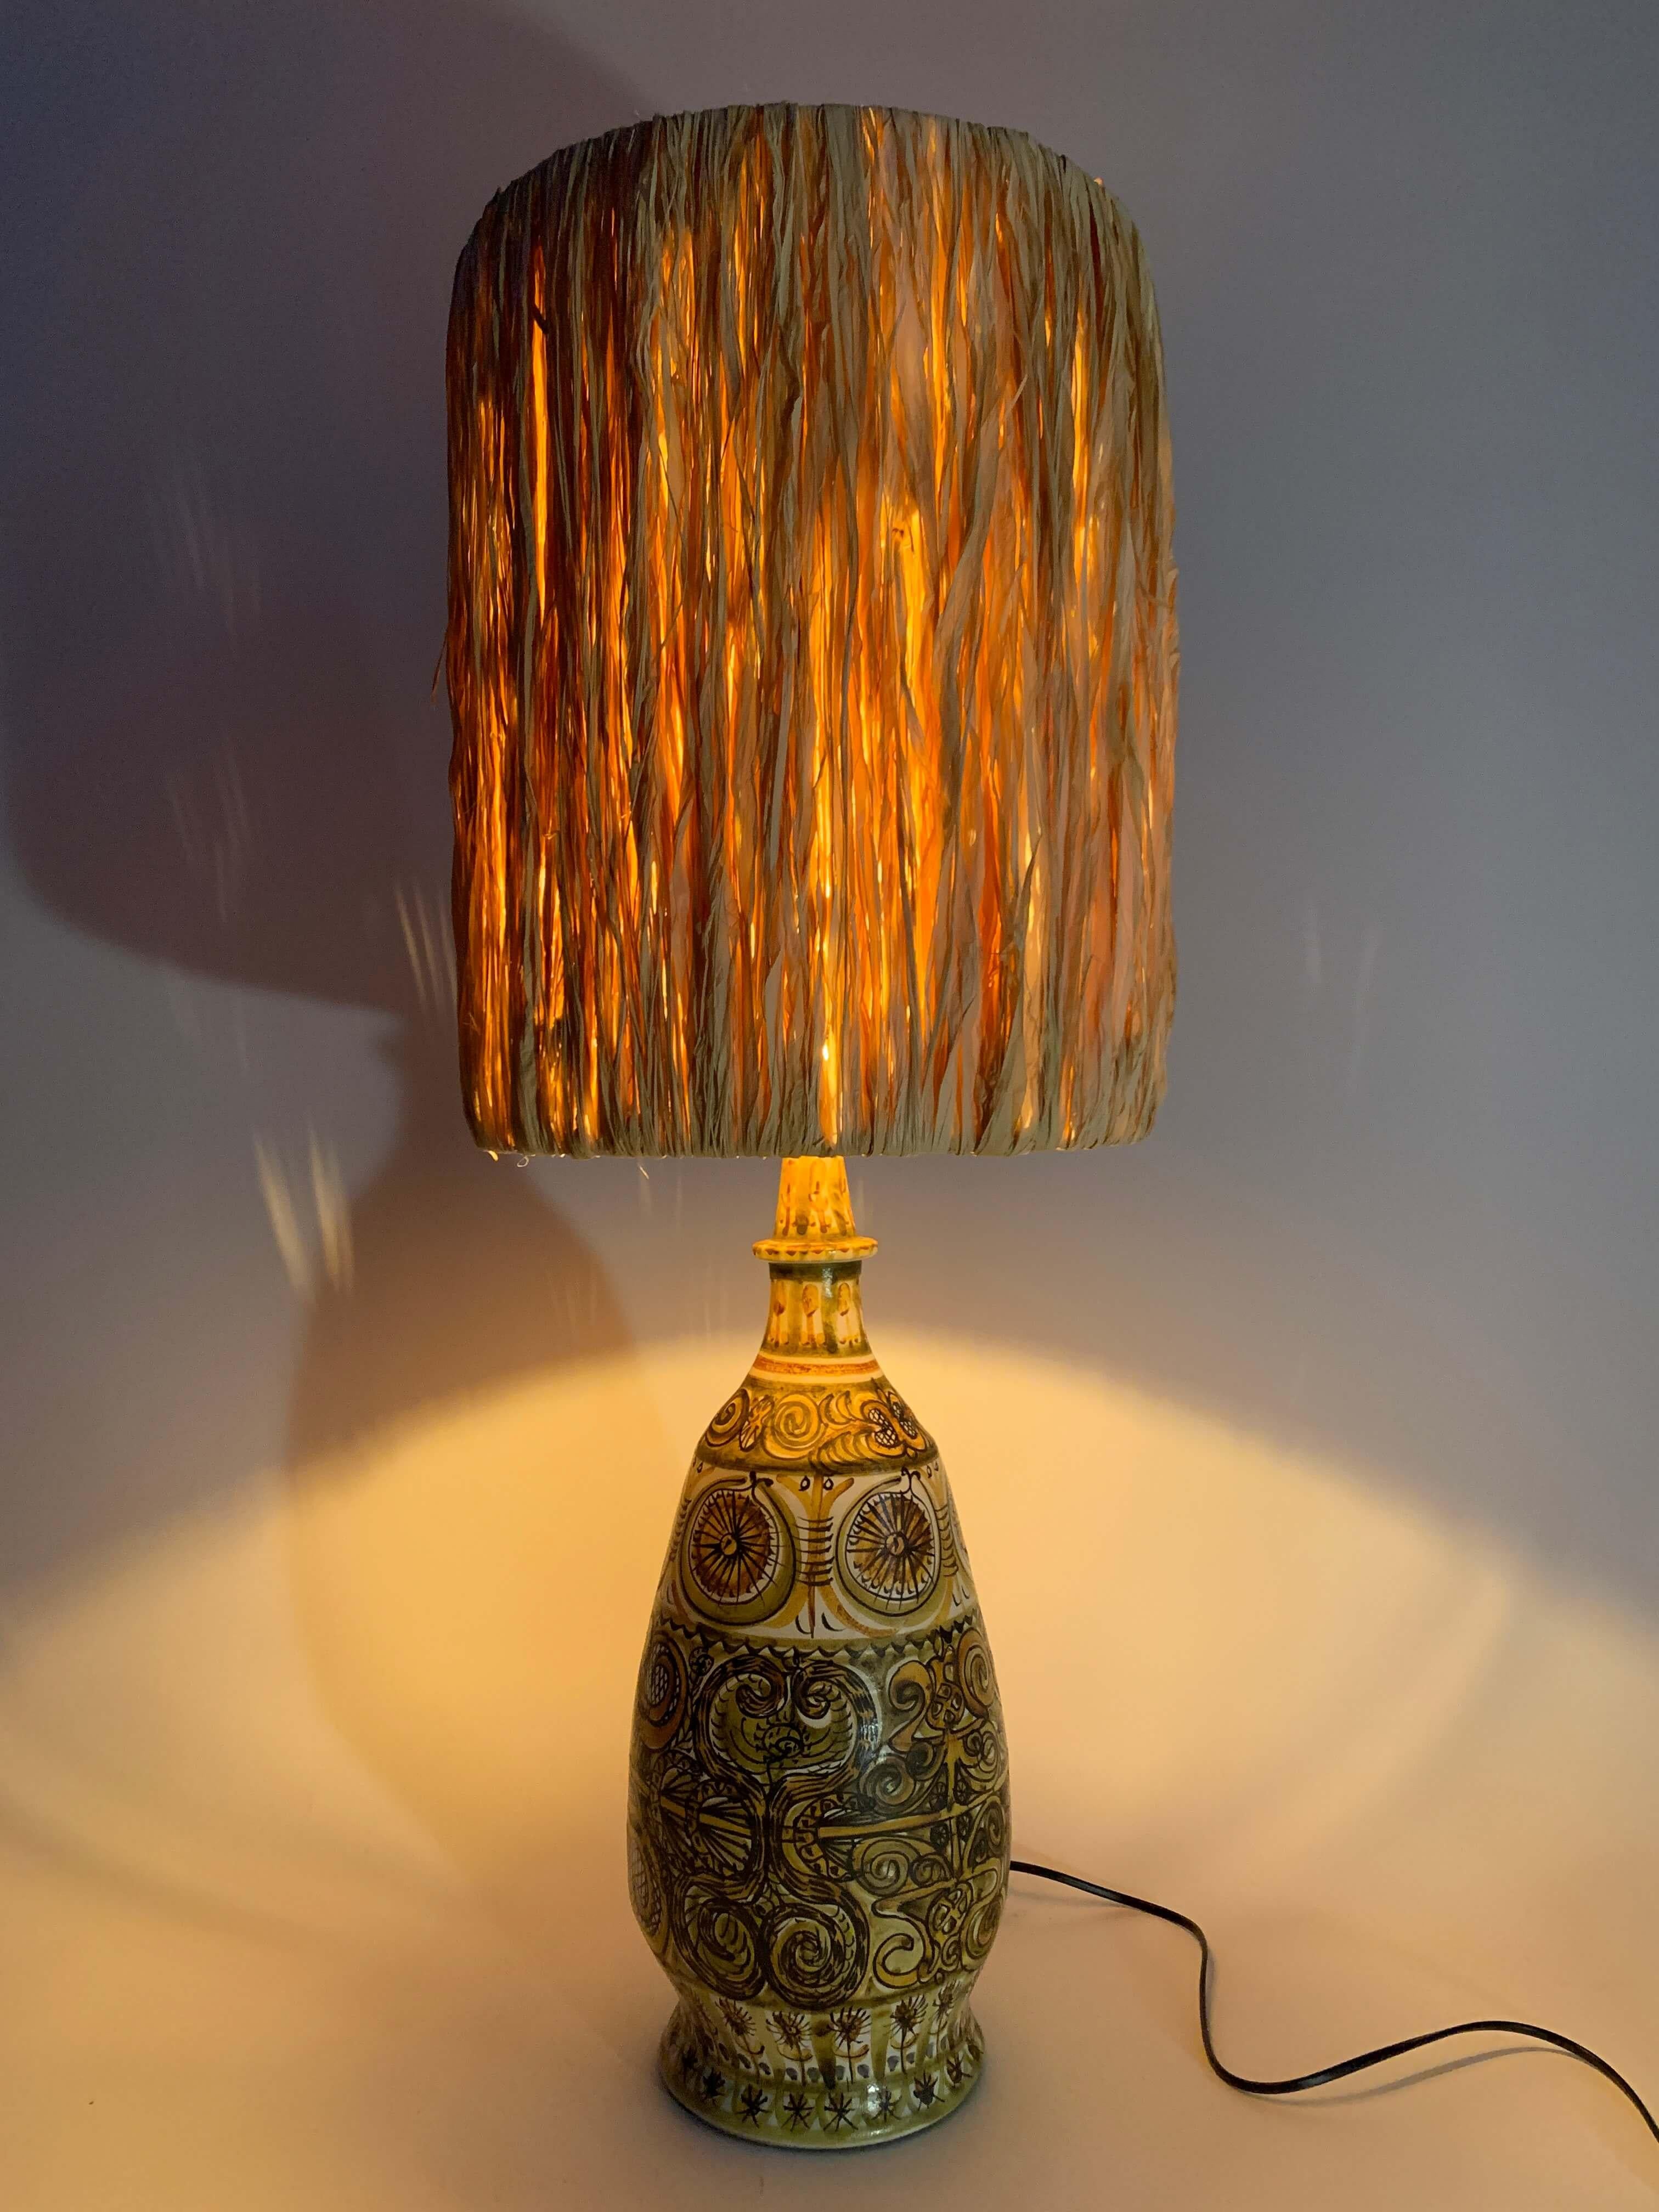 The majestic enameled sandstone lamp by painter André HORELLOU demonstrates his skill, with subtle palettes and a distinctive decor that is all his own.
Unique piece and one of the largest existing table lamp by the artist.

Re-electrified and